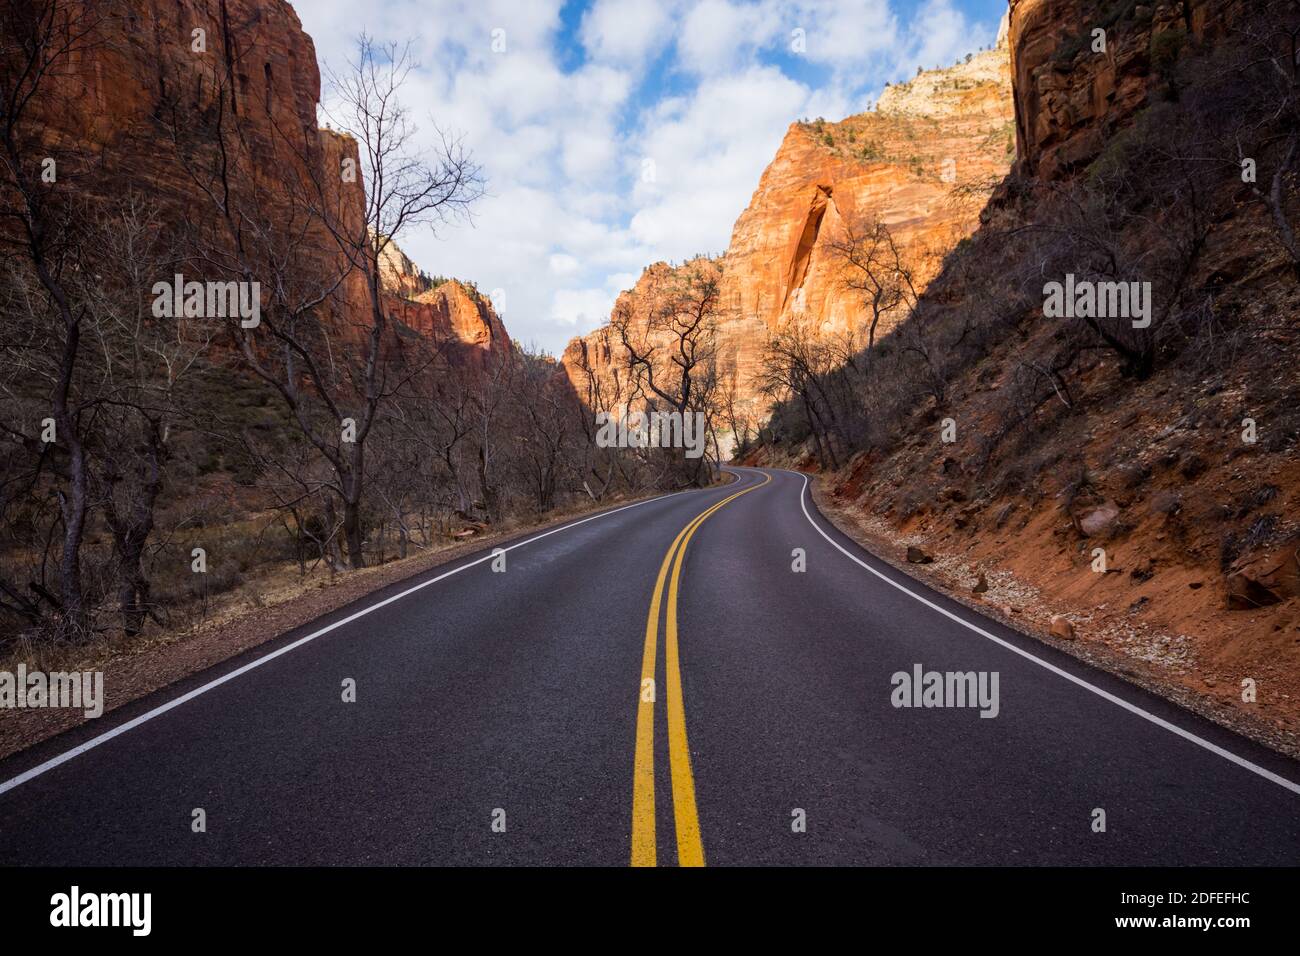 Zion Canyon scenic drive in Zion National Park USA Stock Photo